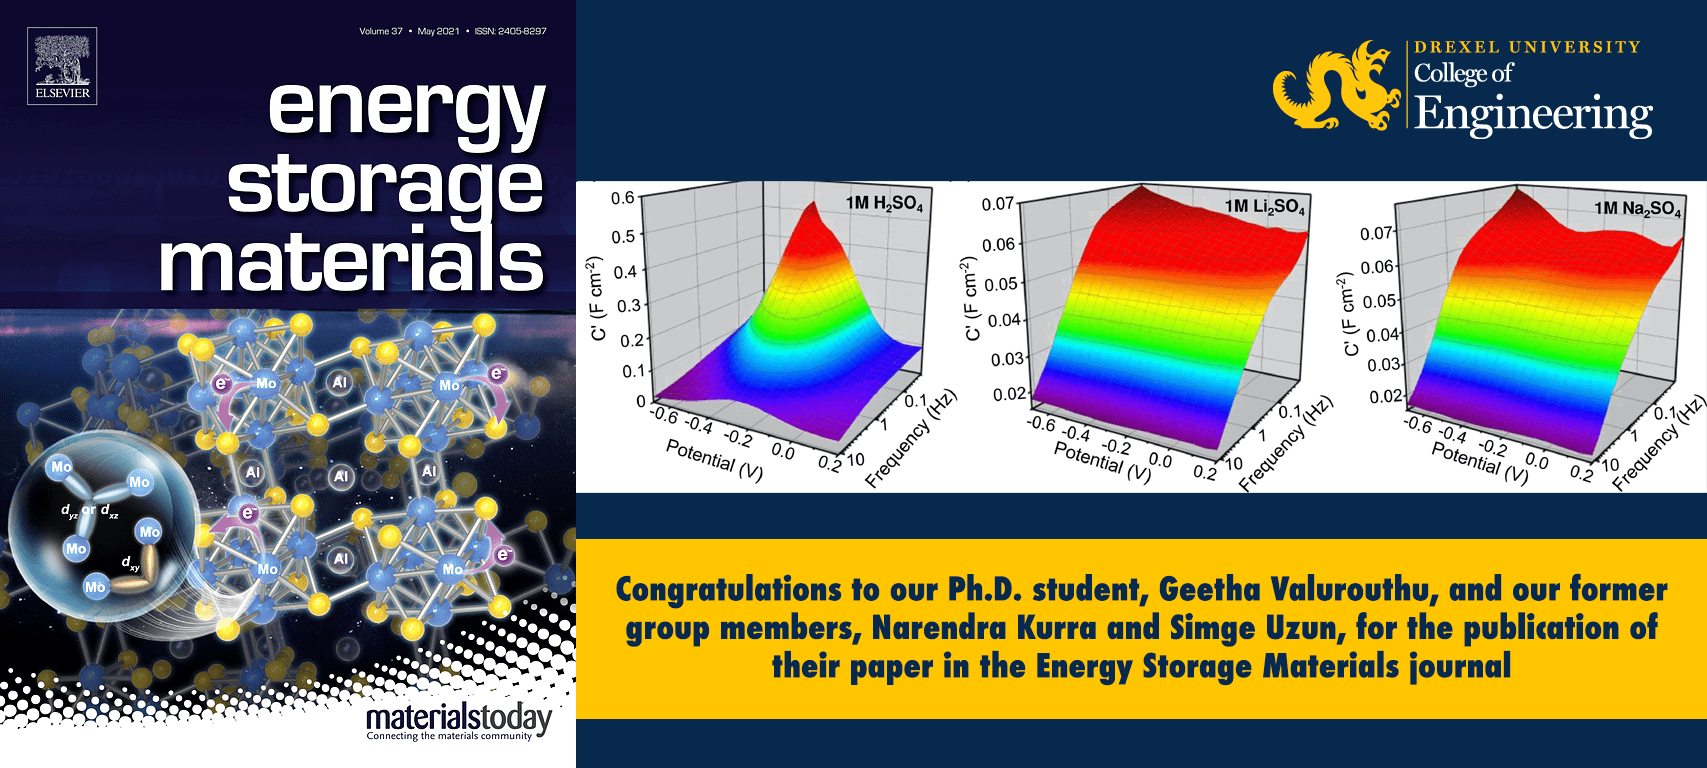 Congratulations to Our Ph.D. student, Geetha Valurouthu, and Our Former Group Members, Narendra Kurra and Simge Uzun, for the Publication of Their Paper in the Energy Storage Materials Journal